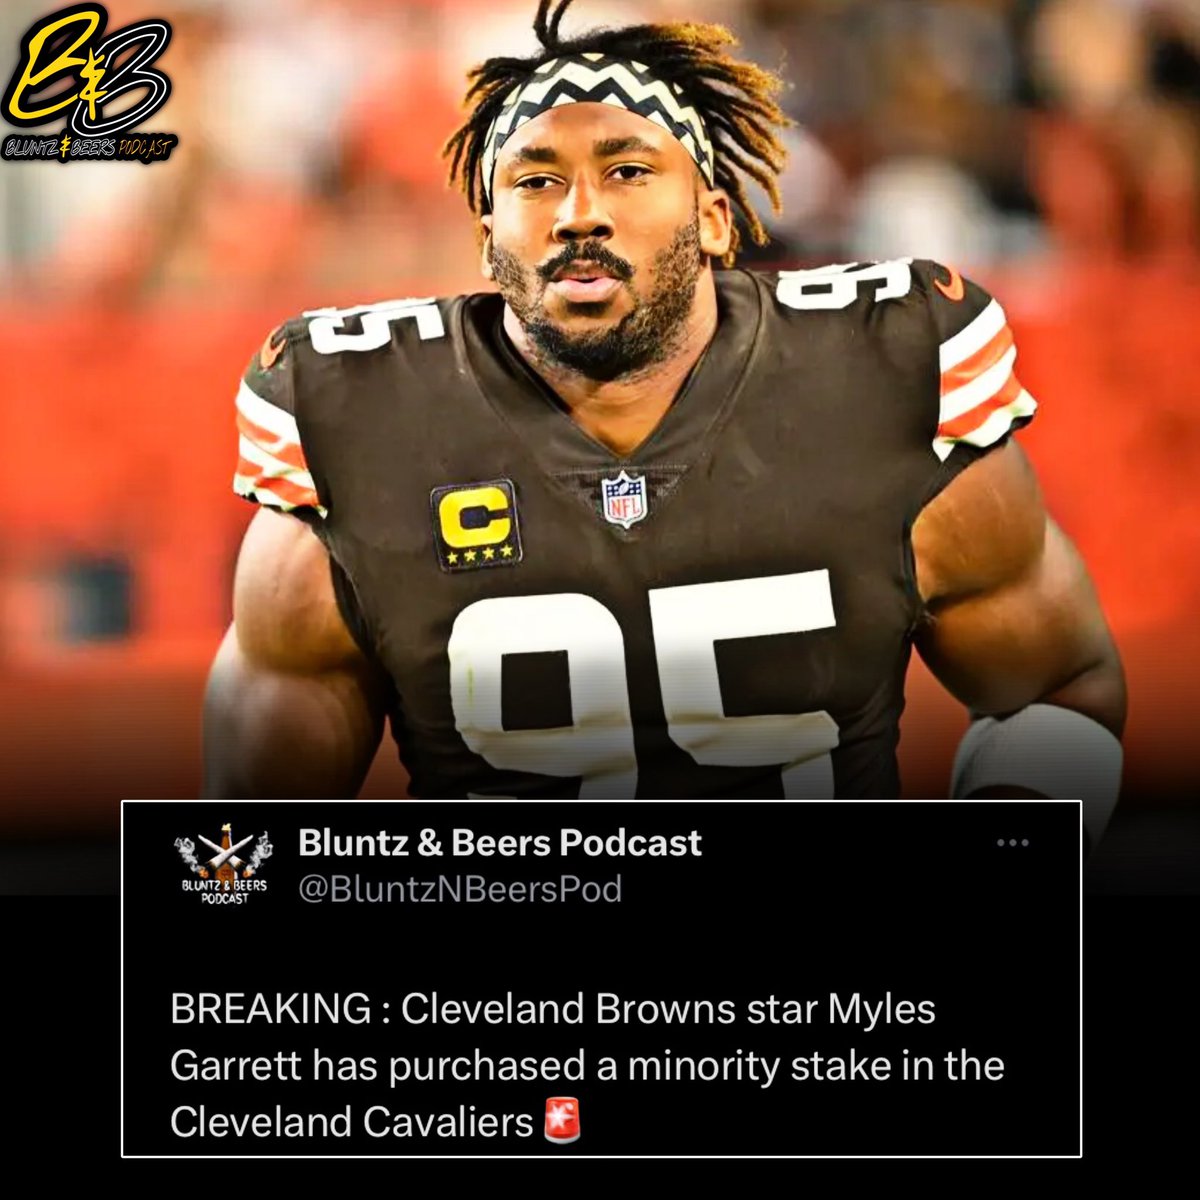 BREAKING: Cleveland Browns star Myles Garrett has purchased a minority stake in the Cleveland Cavaliers🚨

Thoughts ? 🤔

#nba #clevelandcavaliers #mylesgarret